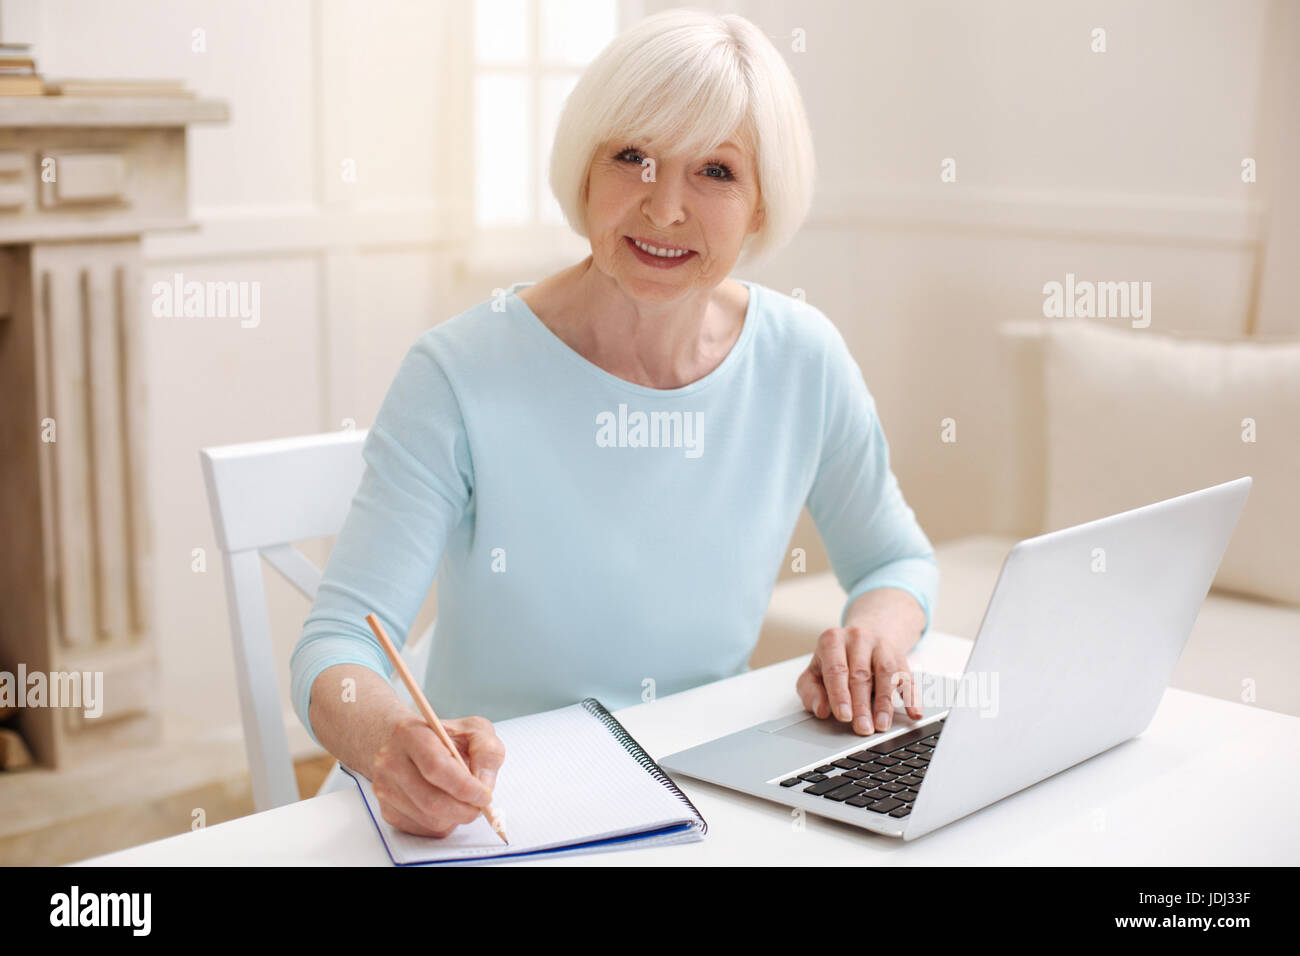 Lively aged woman busy as a bee Stock Photo